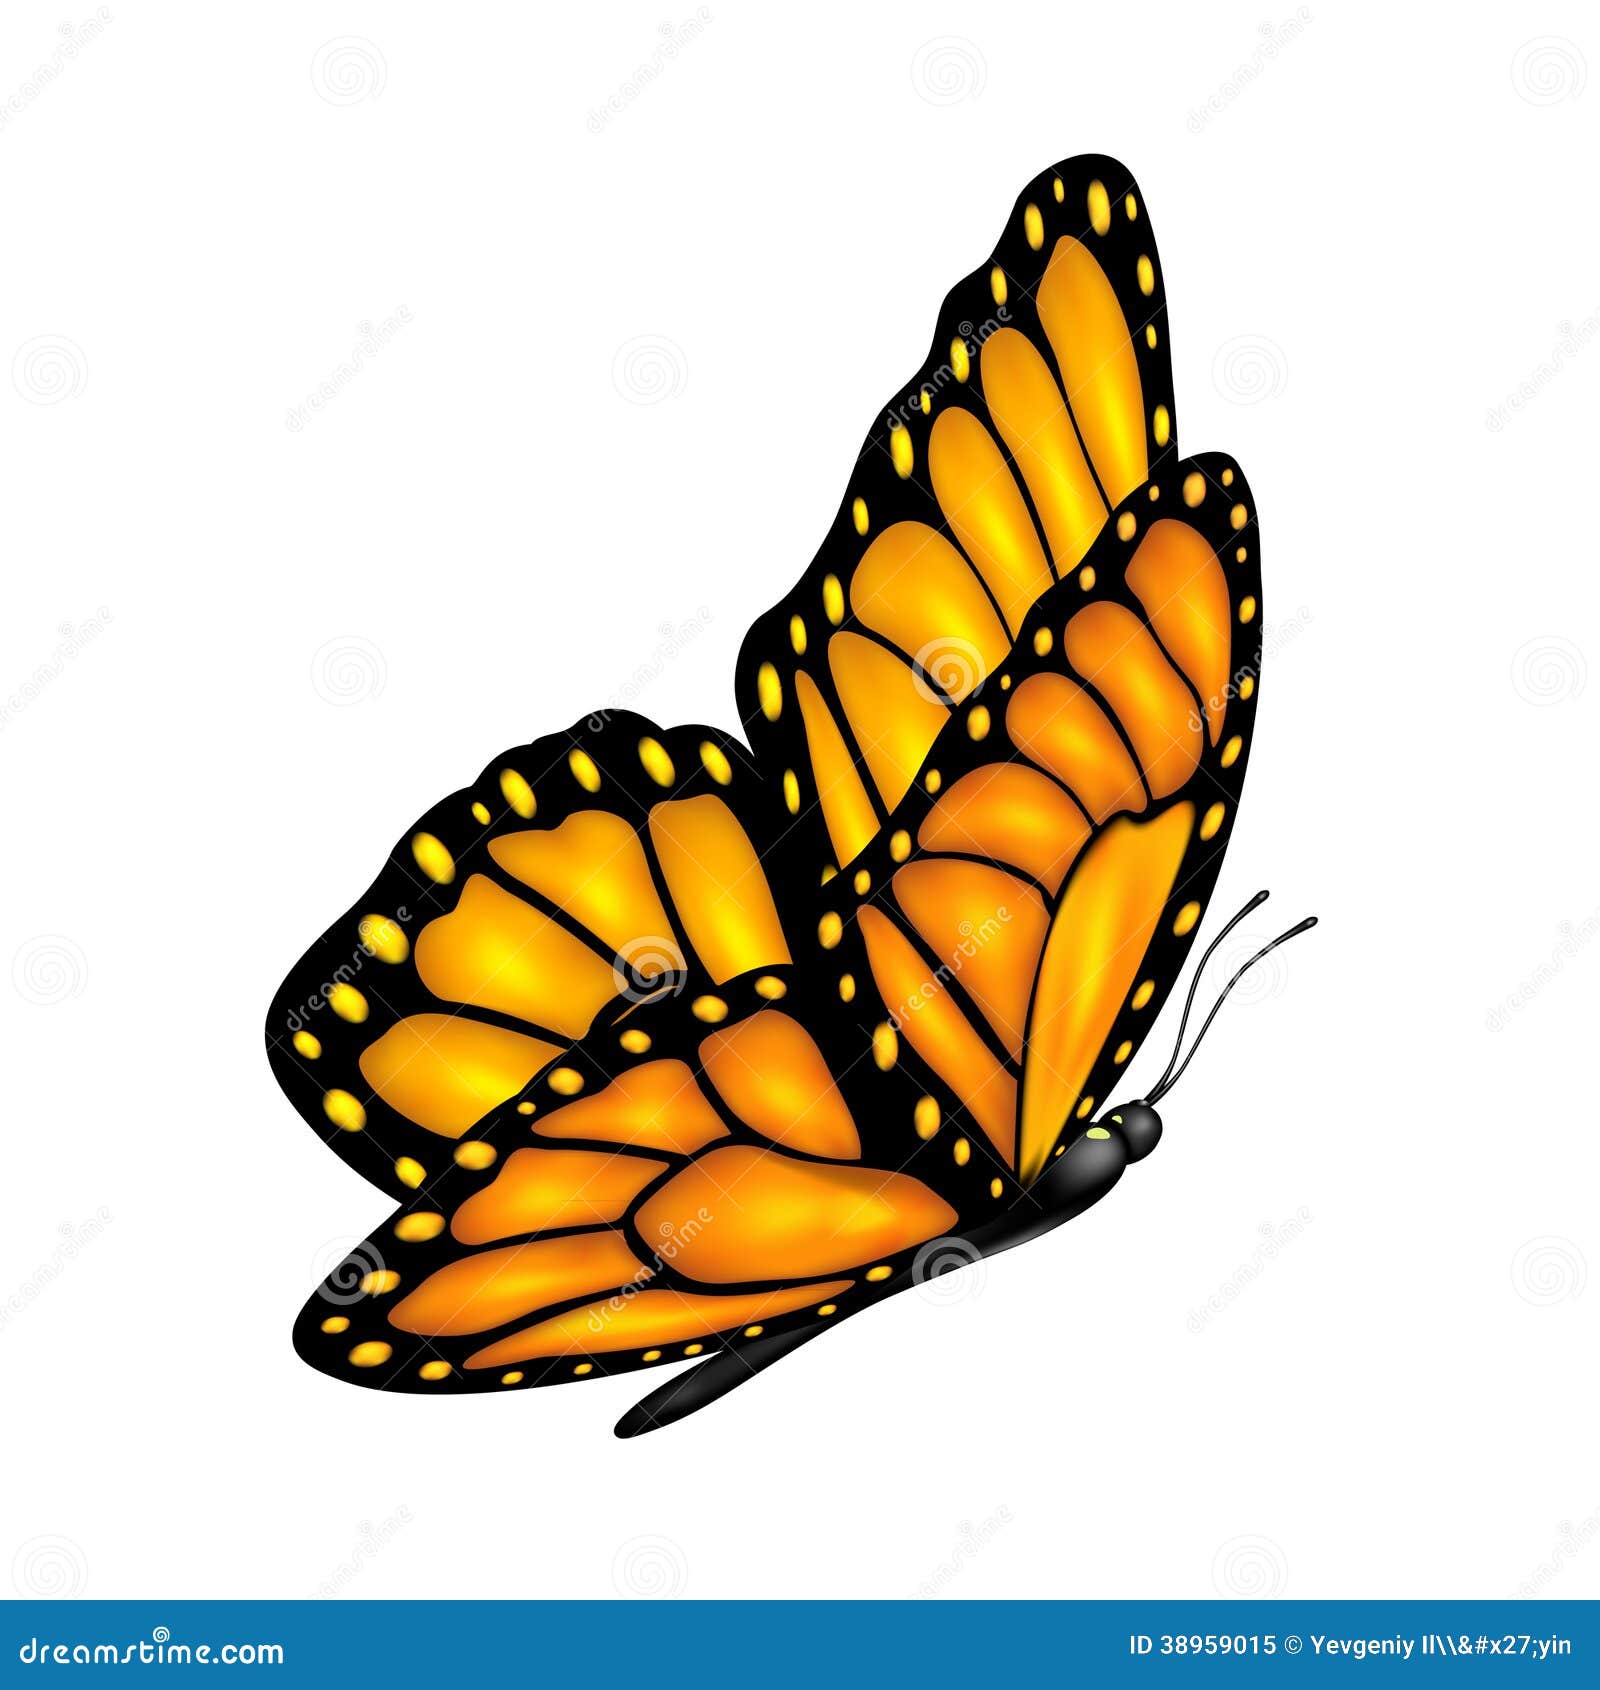 butterfly clipart no background - photo #44